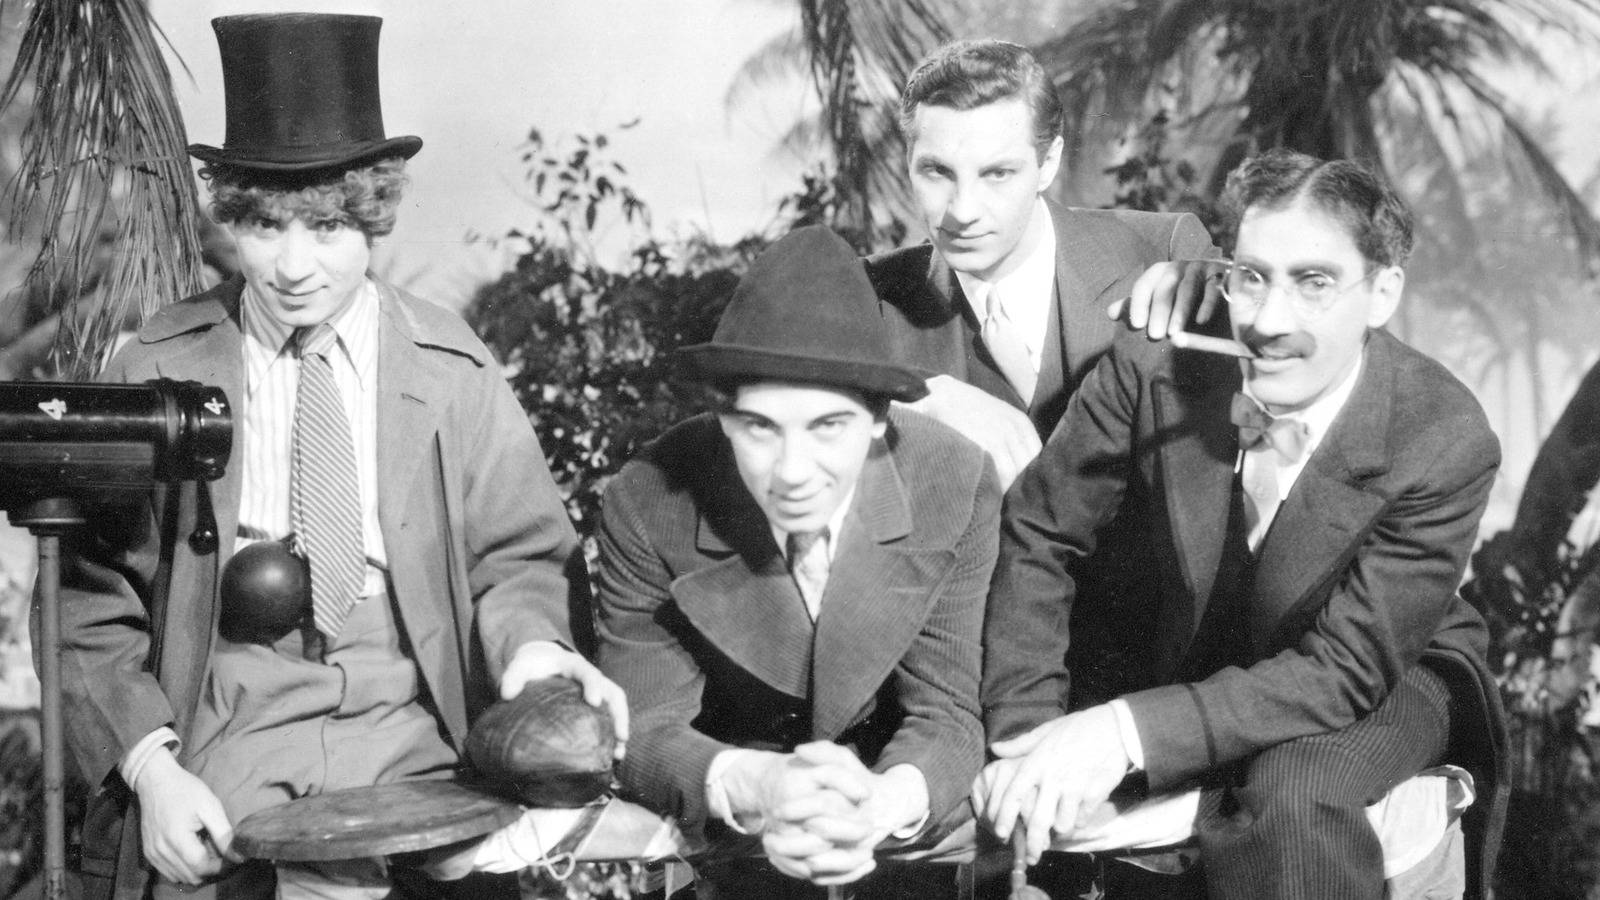 Marx Brothers Posing Together